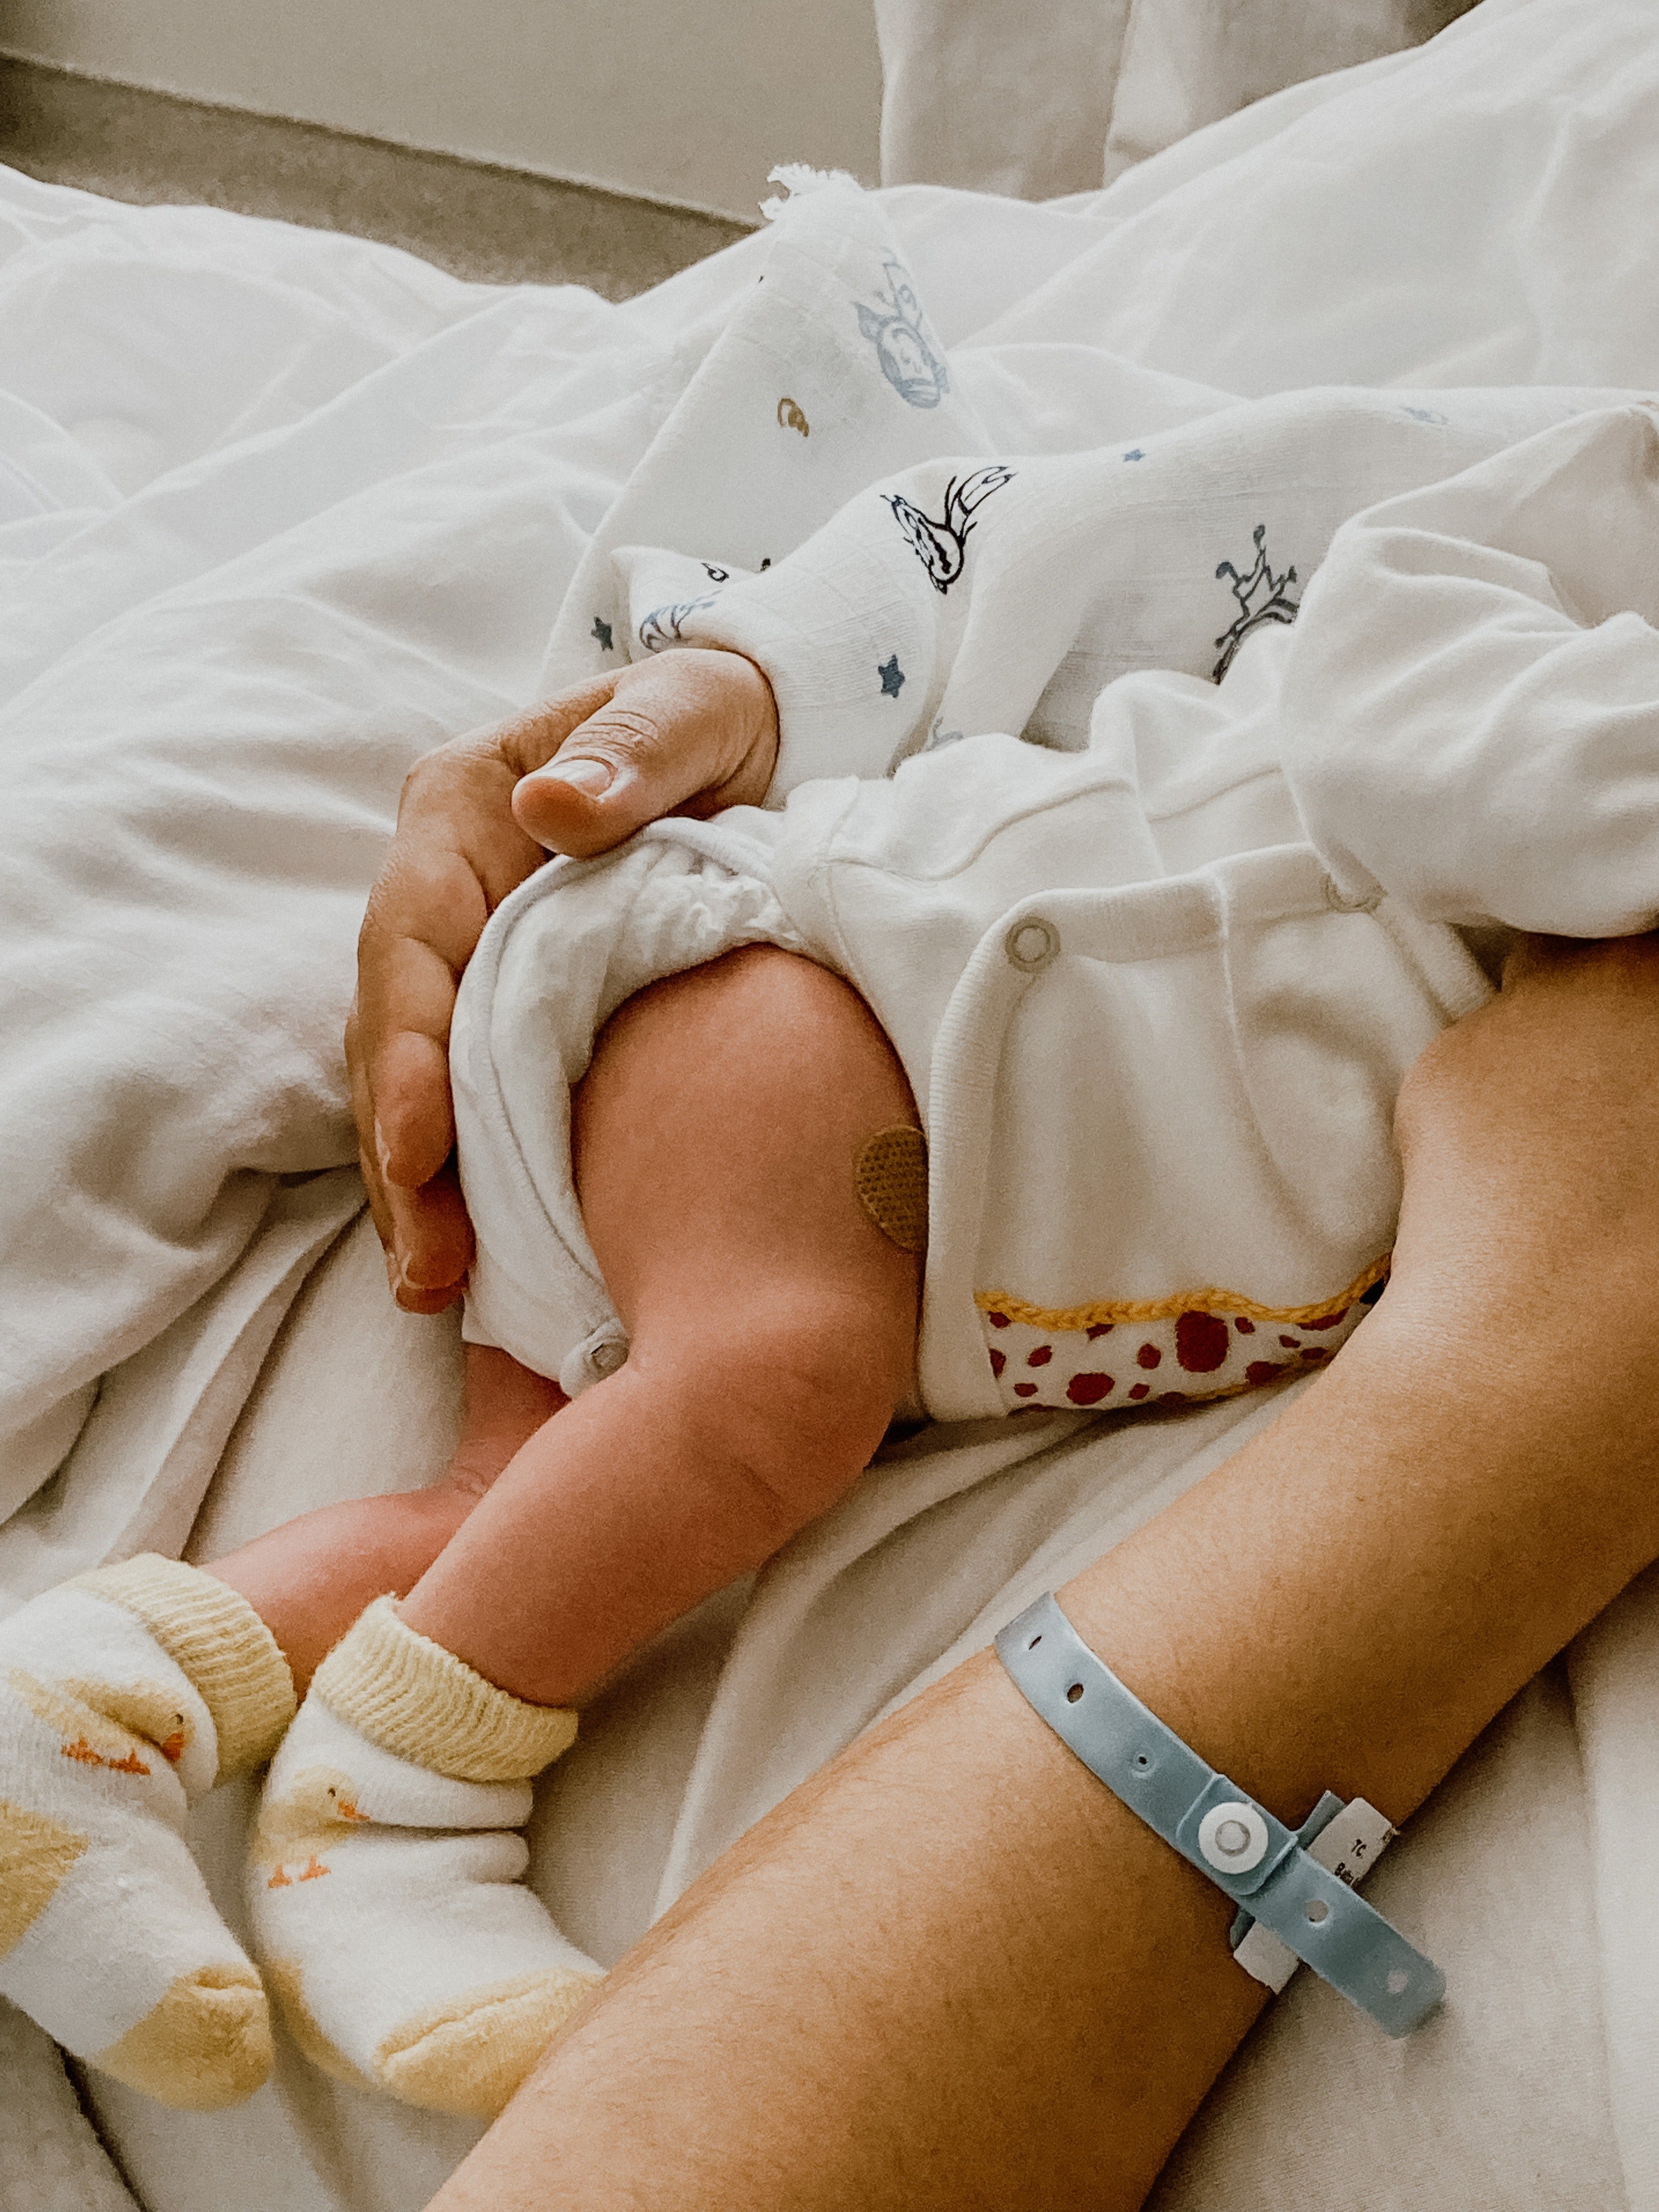 Paige, who had just recovered from the delivery, was stunned when she saw her red-faced daughter crying | Source: Pexels